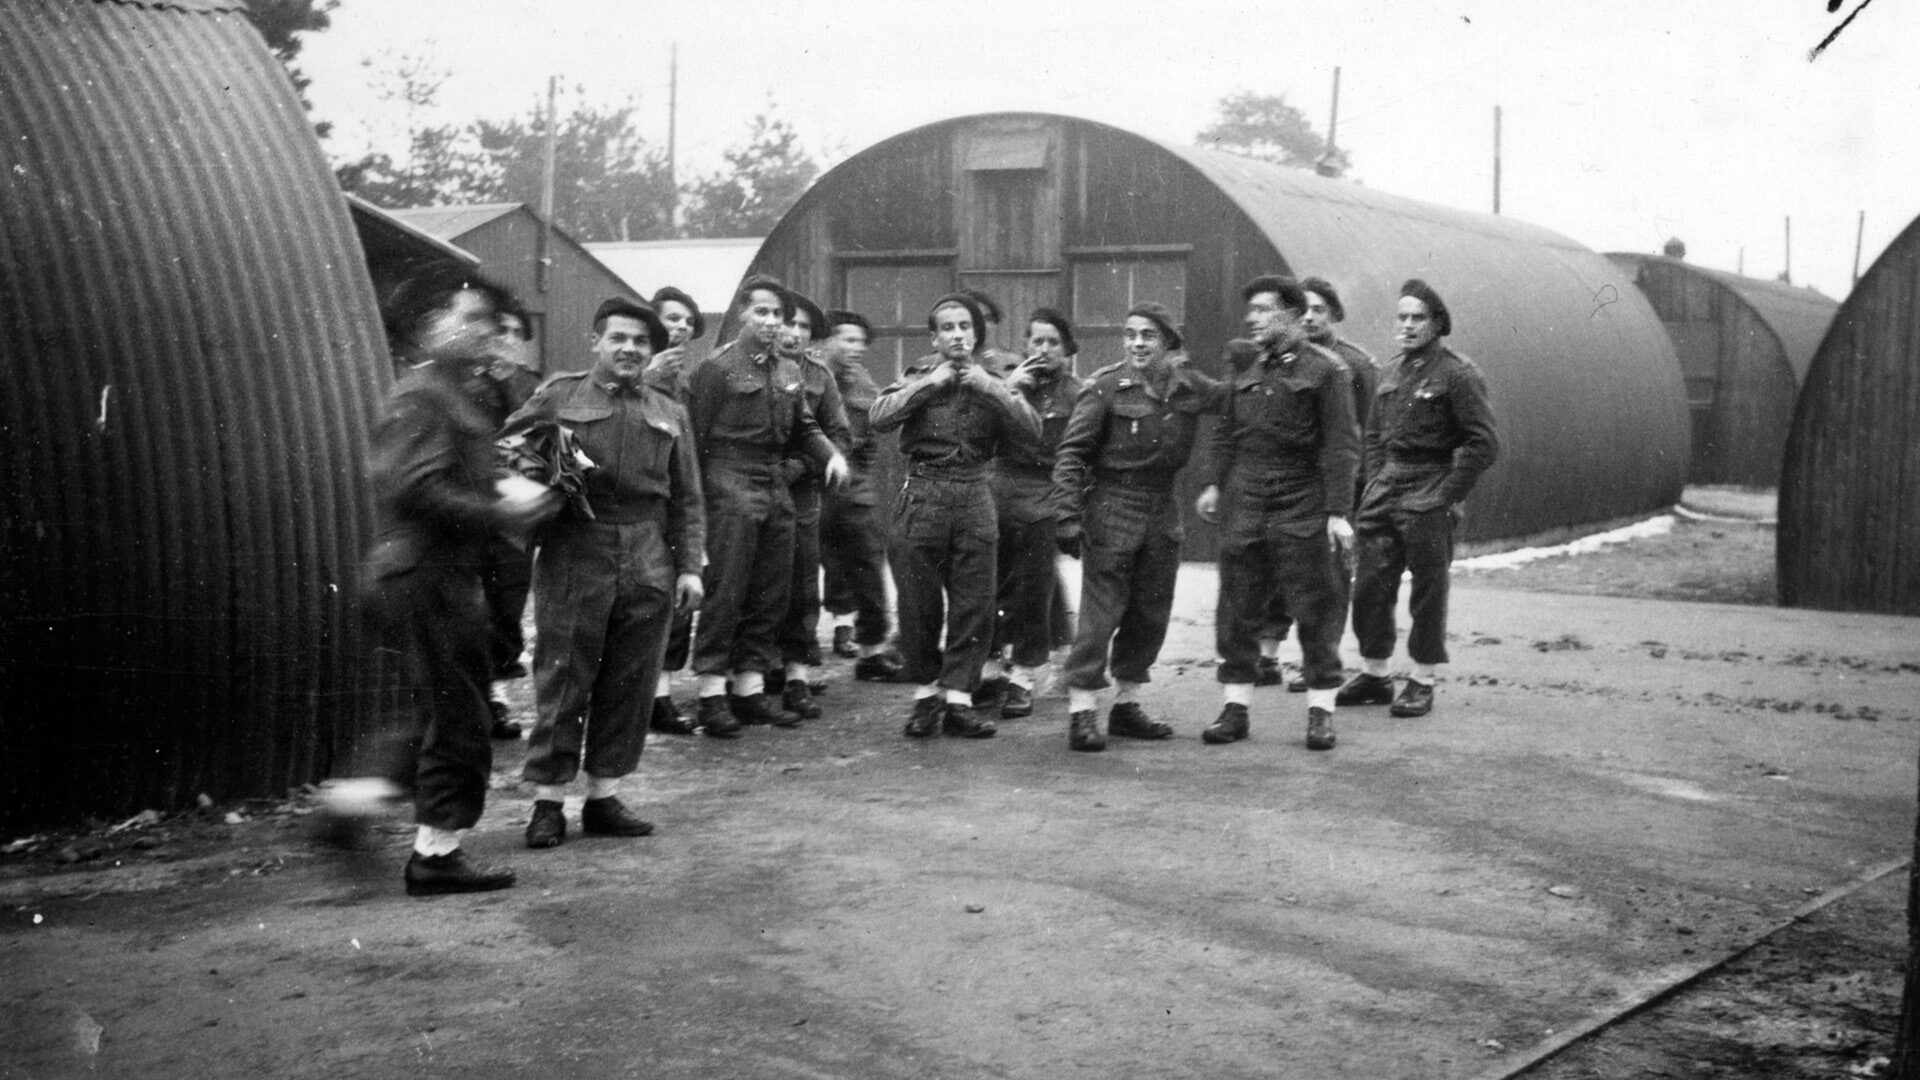 Members of René Champion’s 3rd Company photographed at Camberley, their training base near London, England, in 1942. The men were of various nationalities, including Americans, who volunteered to free France. 